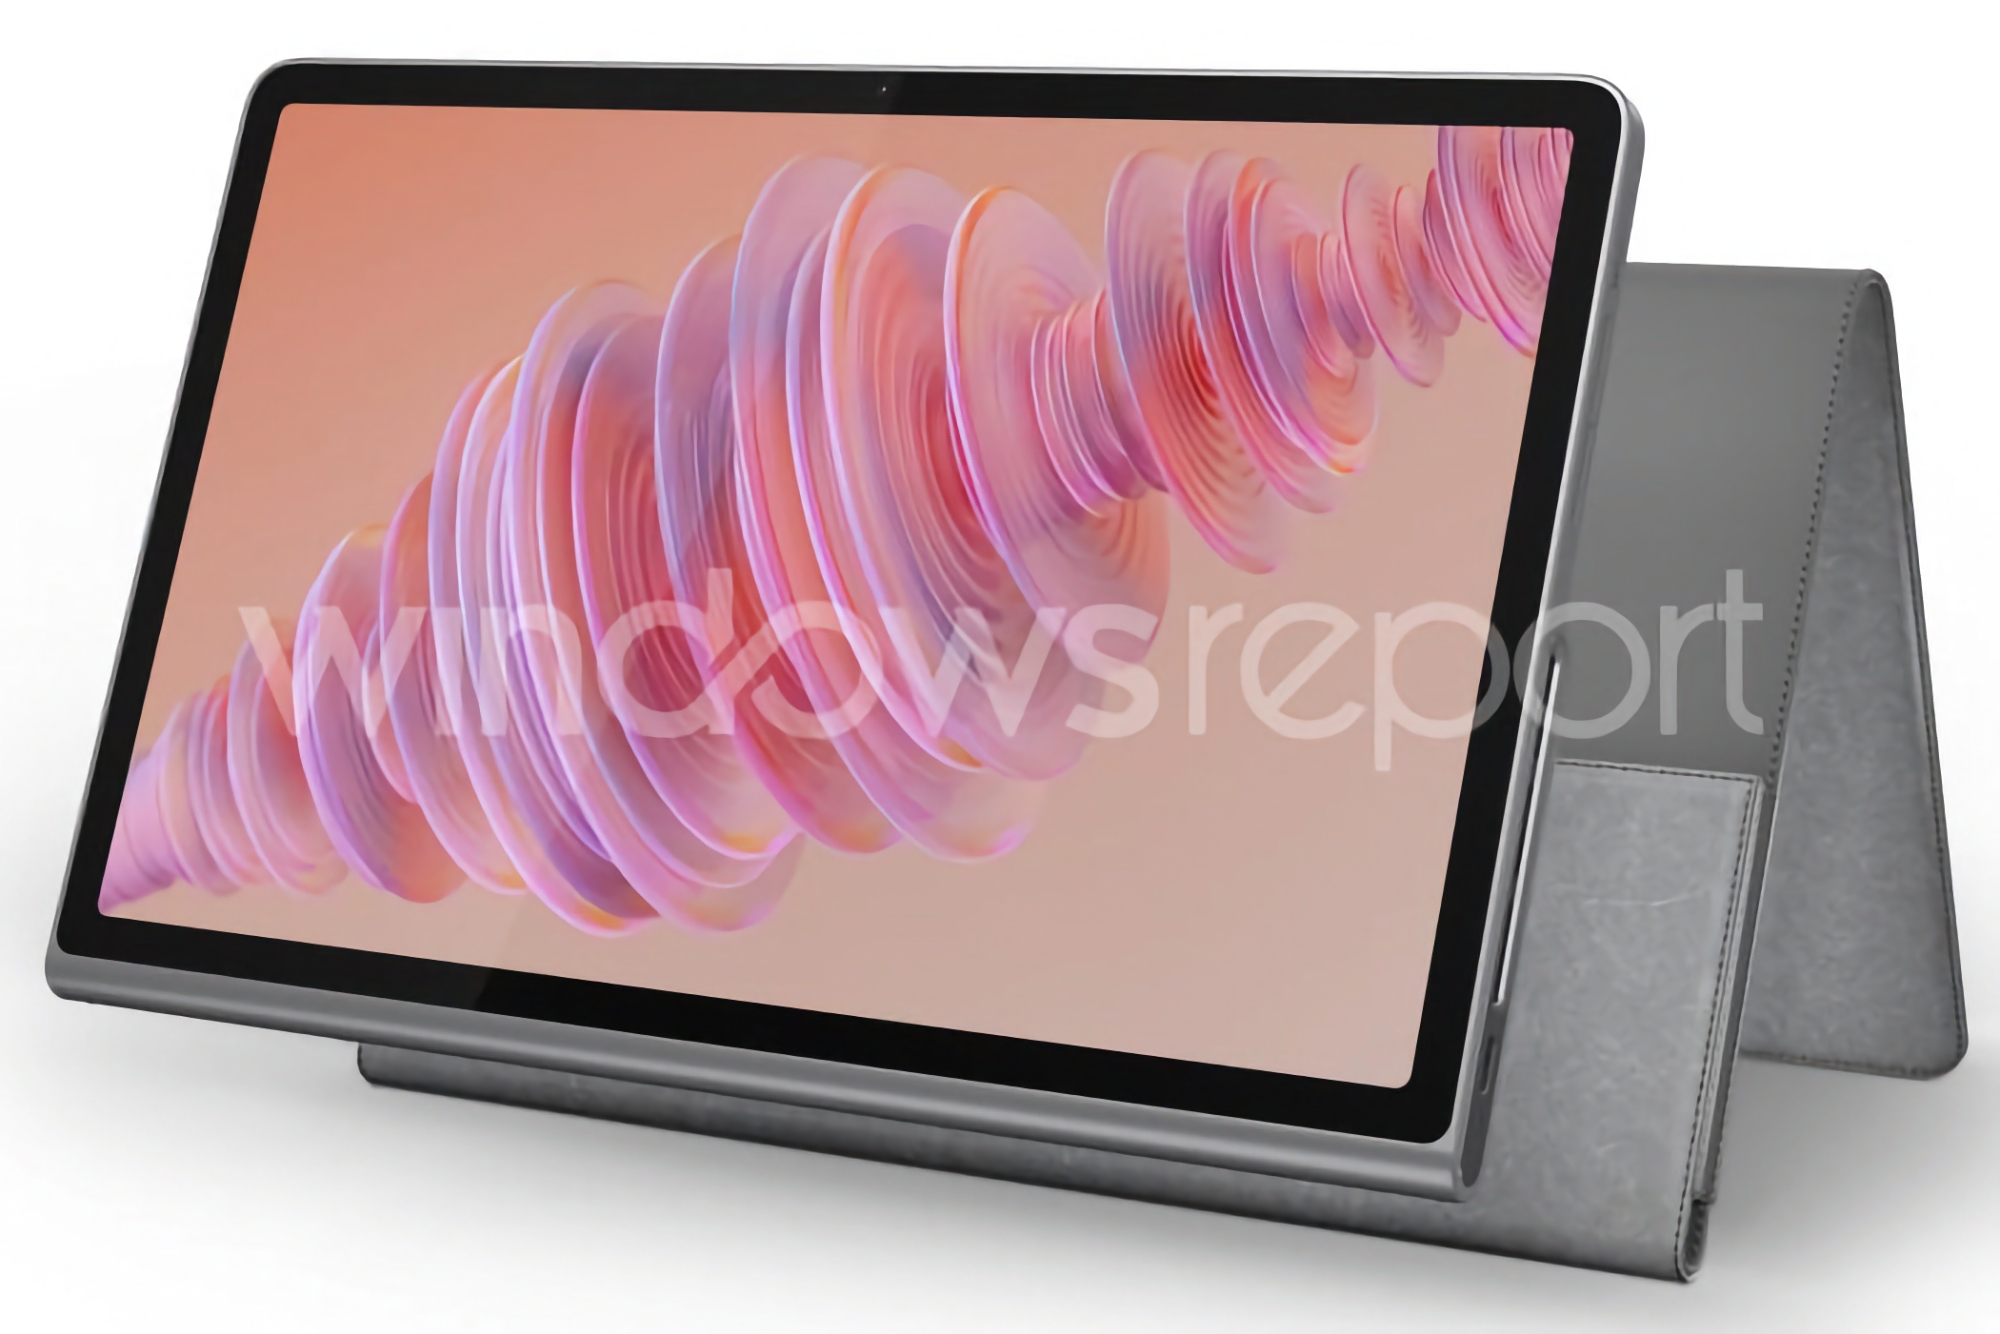 Lenovo is preparing to release a Tab Plus tablet with a built-in stand and stereo speakers